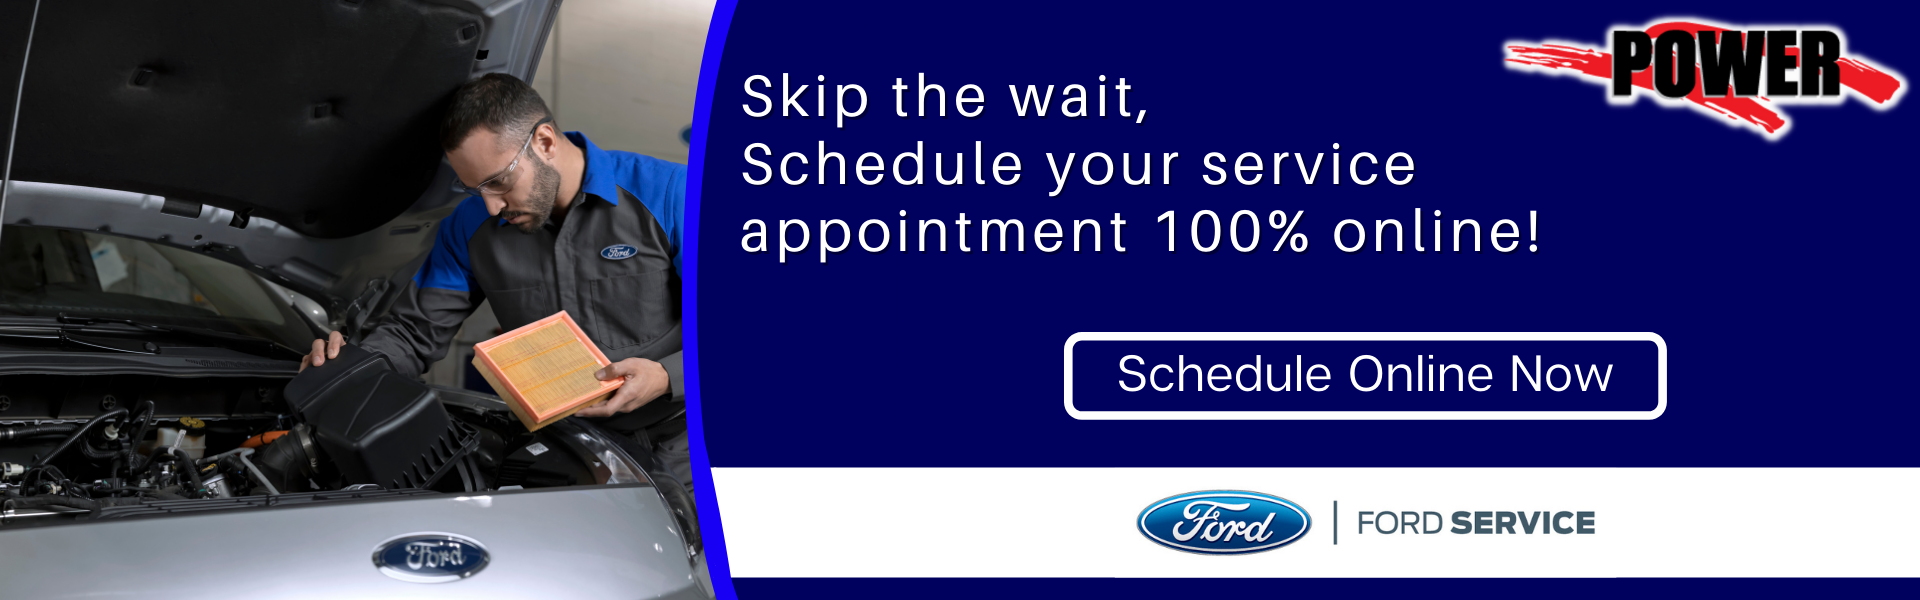 Schedule your service appointment online